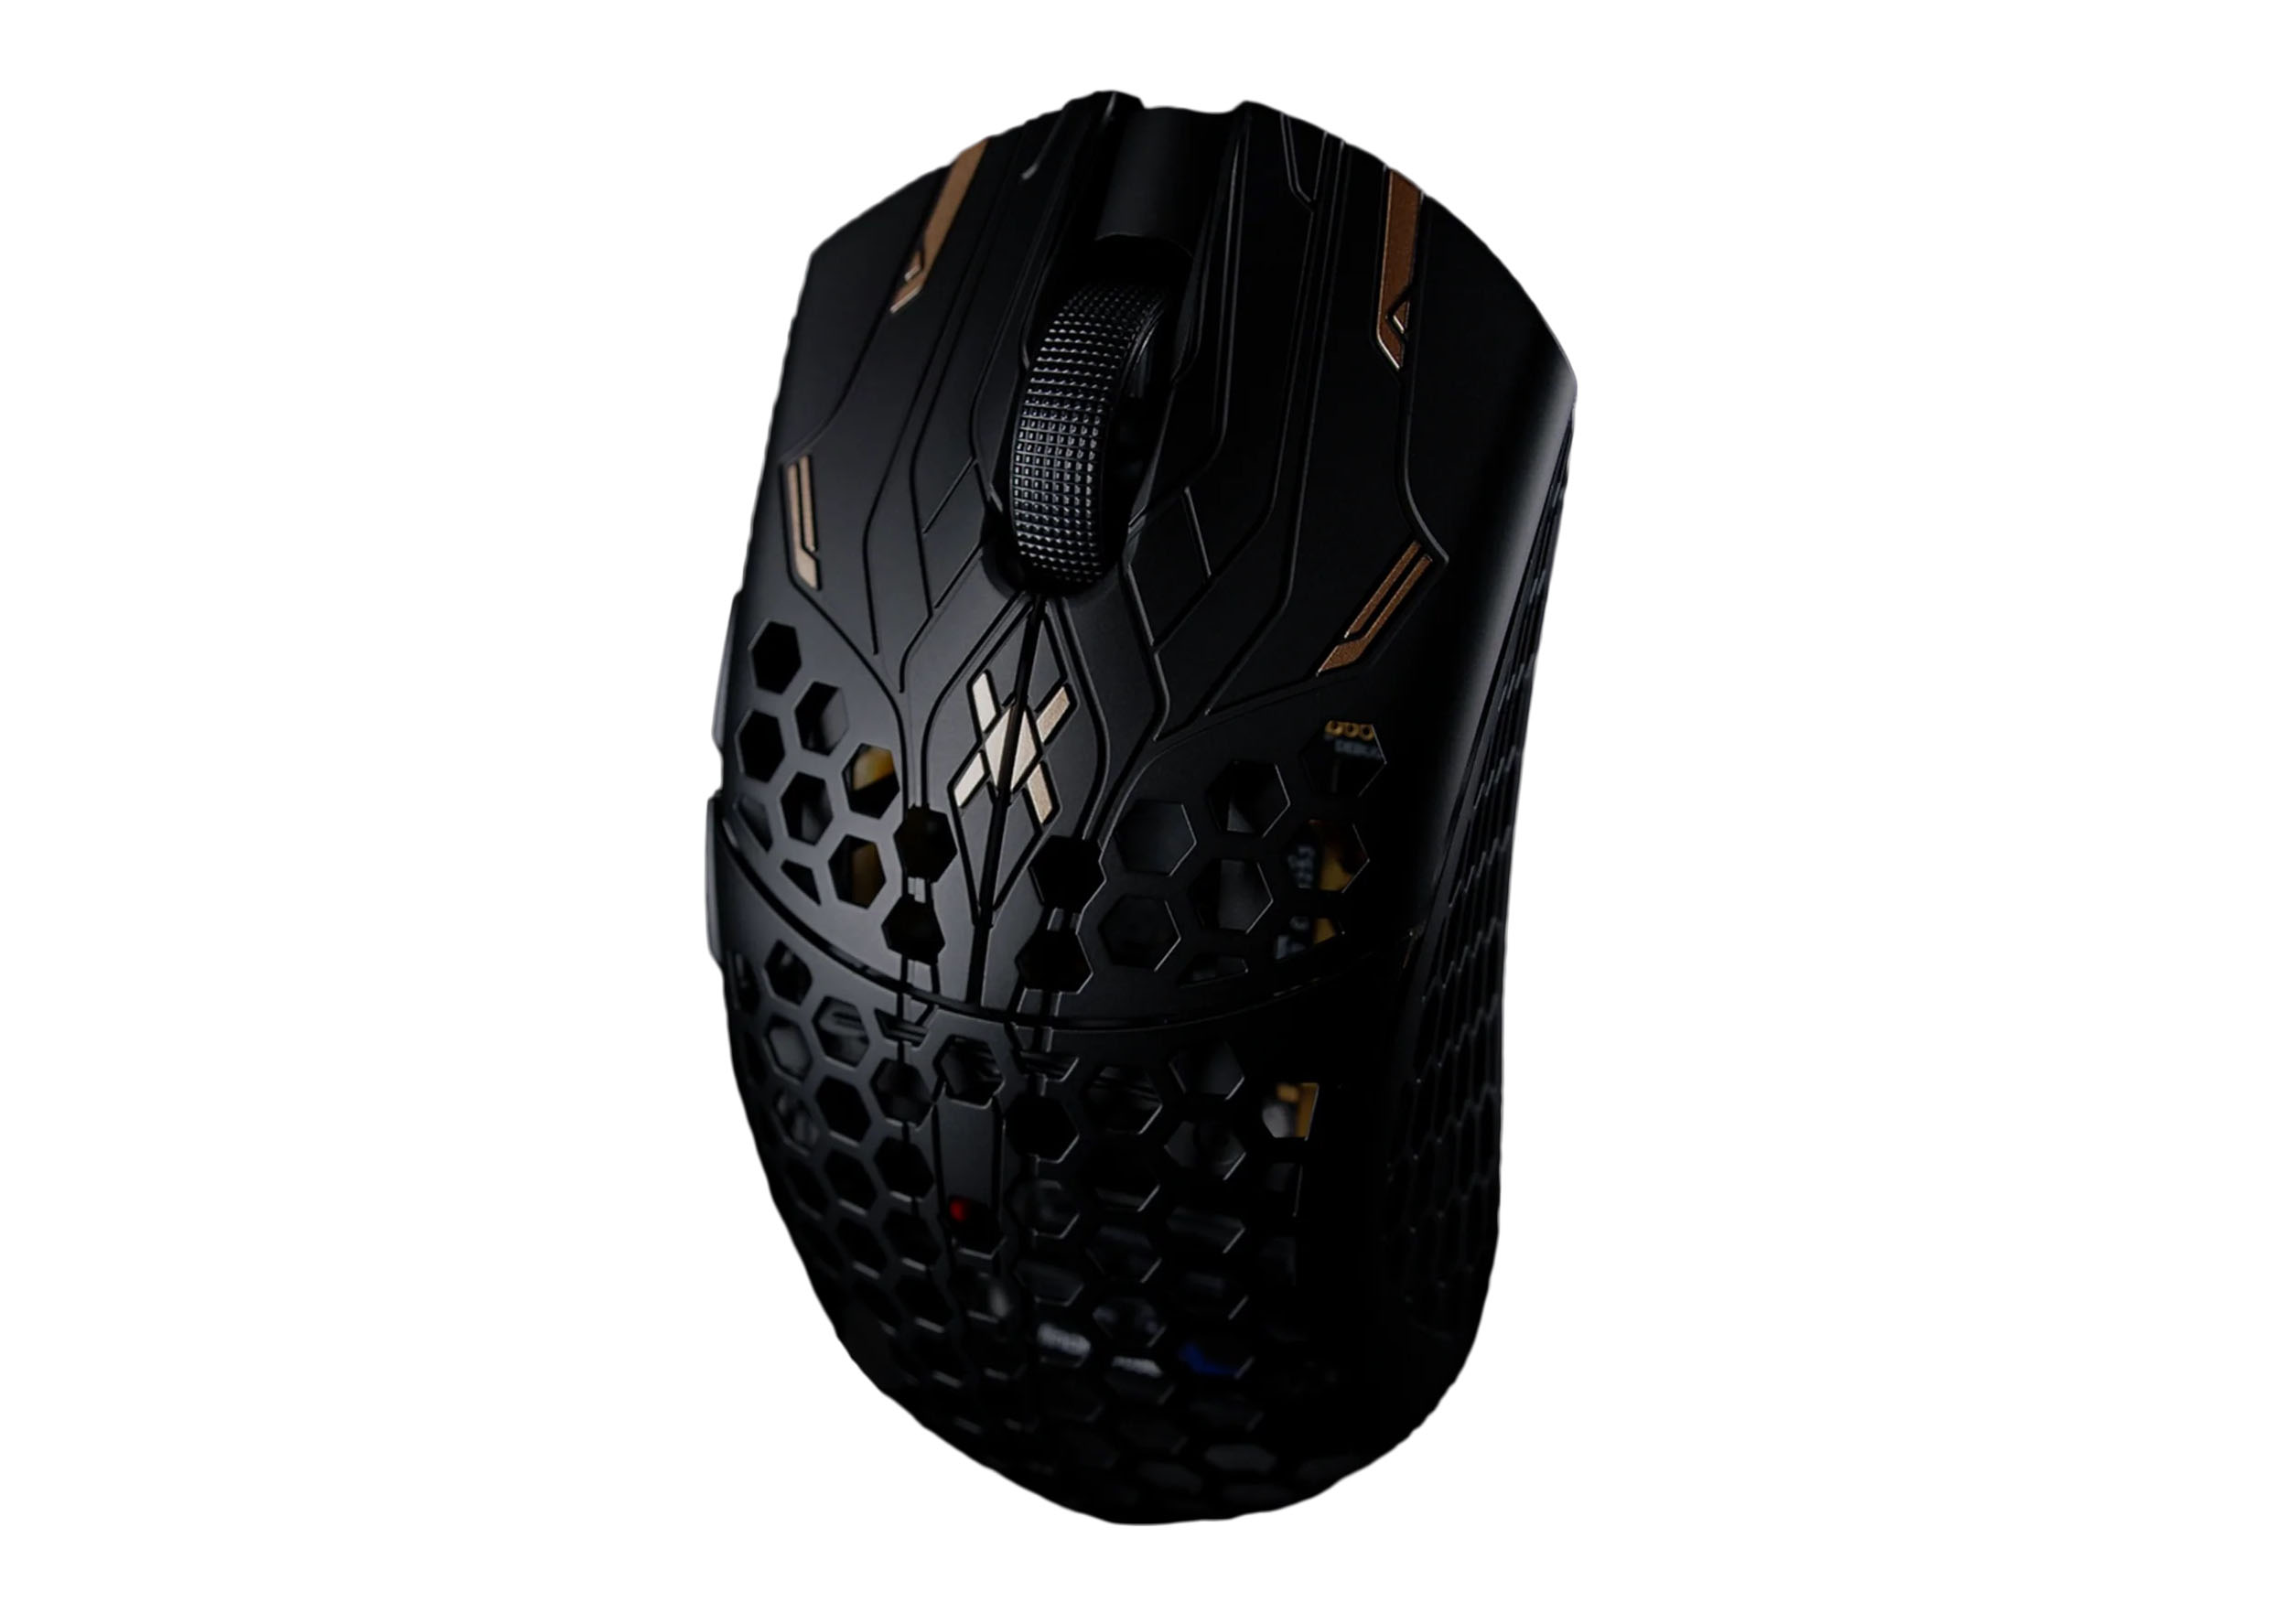 Finalmouse UltralightX Guardian Wireless Mouse 121 x 57mm Black/Gold